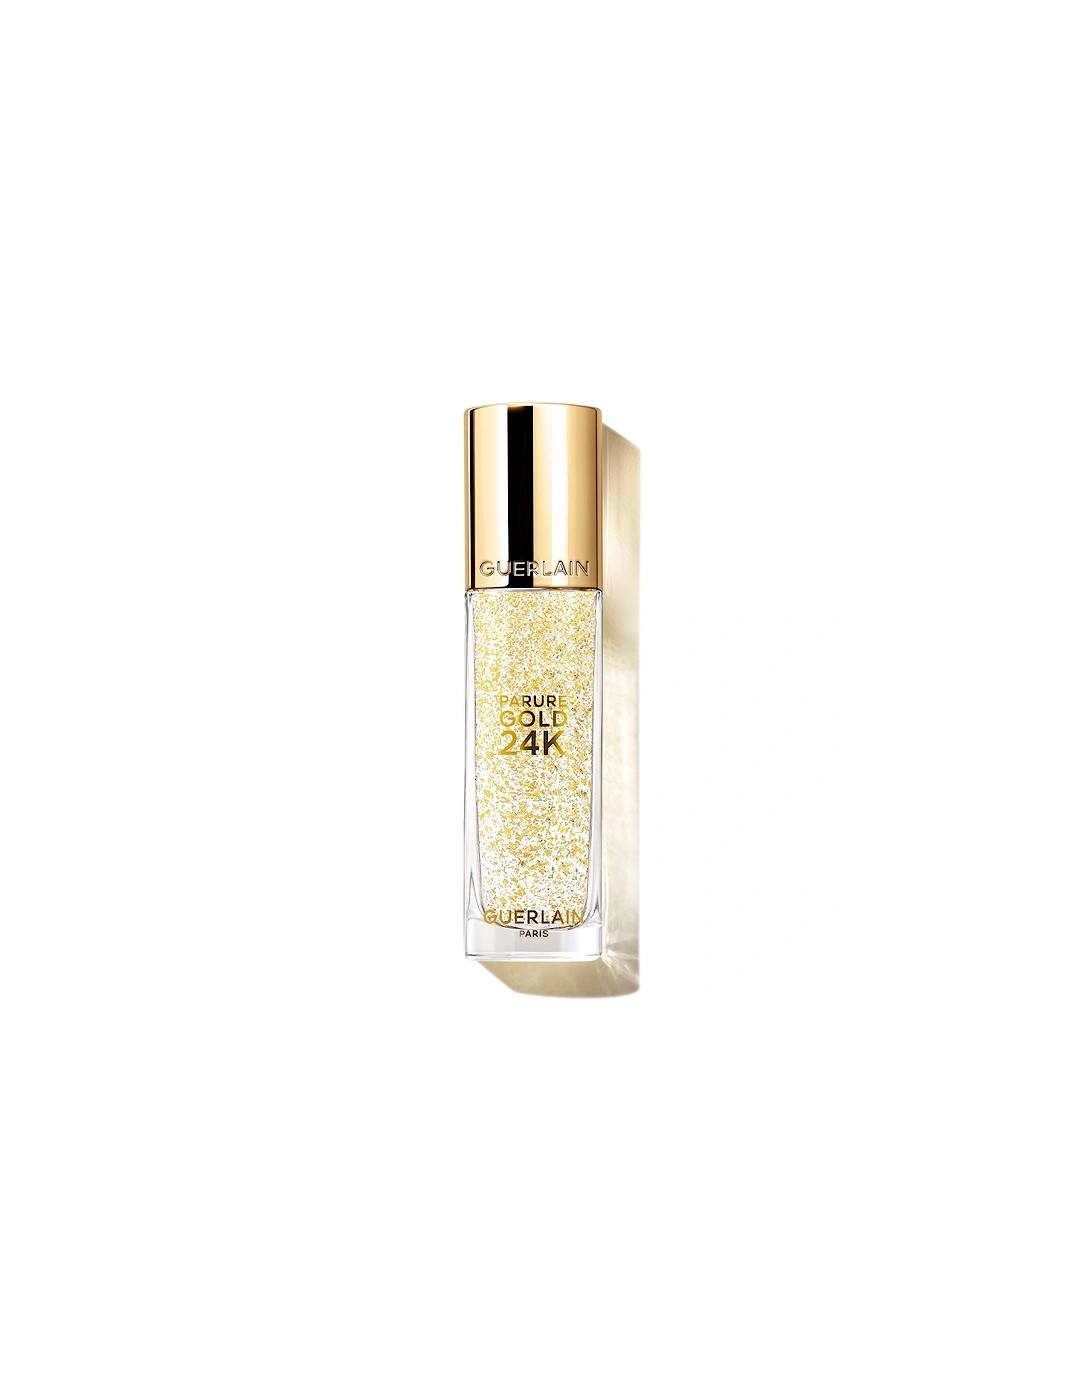 24H Hydration Parure Gold 24K Radiance Booster Perfection Primer - Yellow Gold, 2 of 1